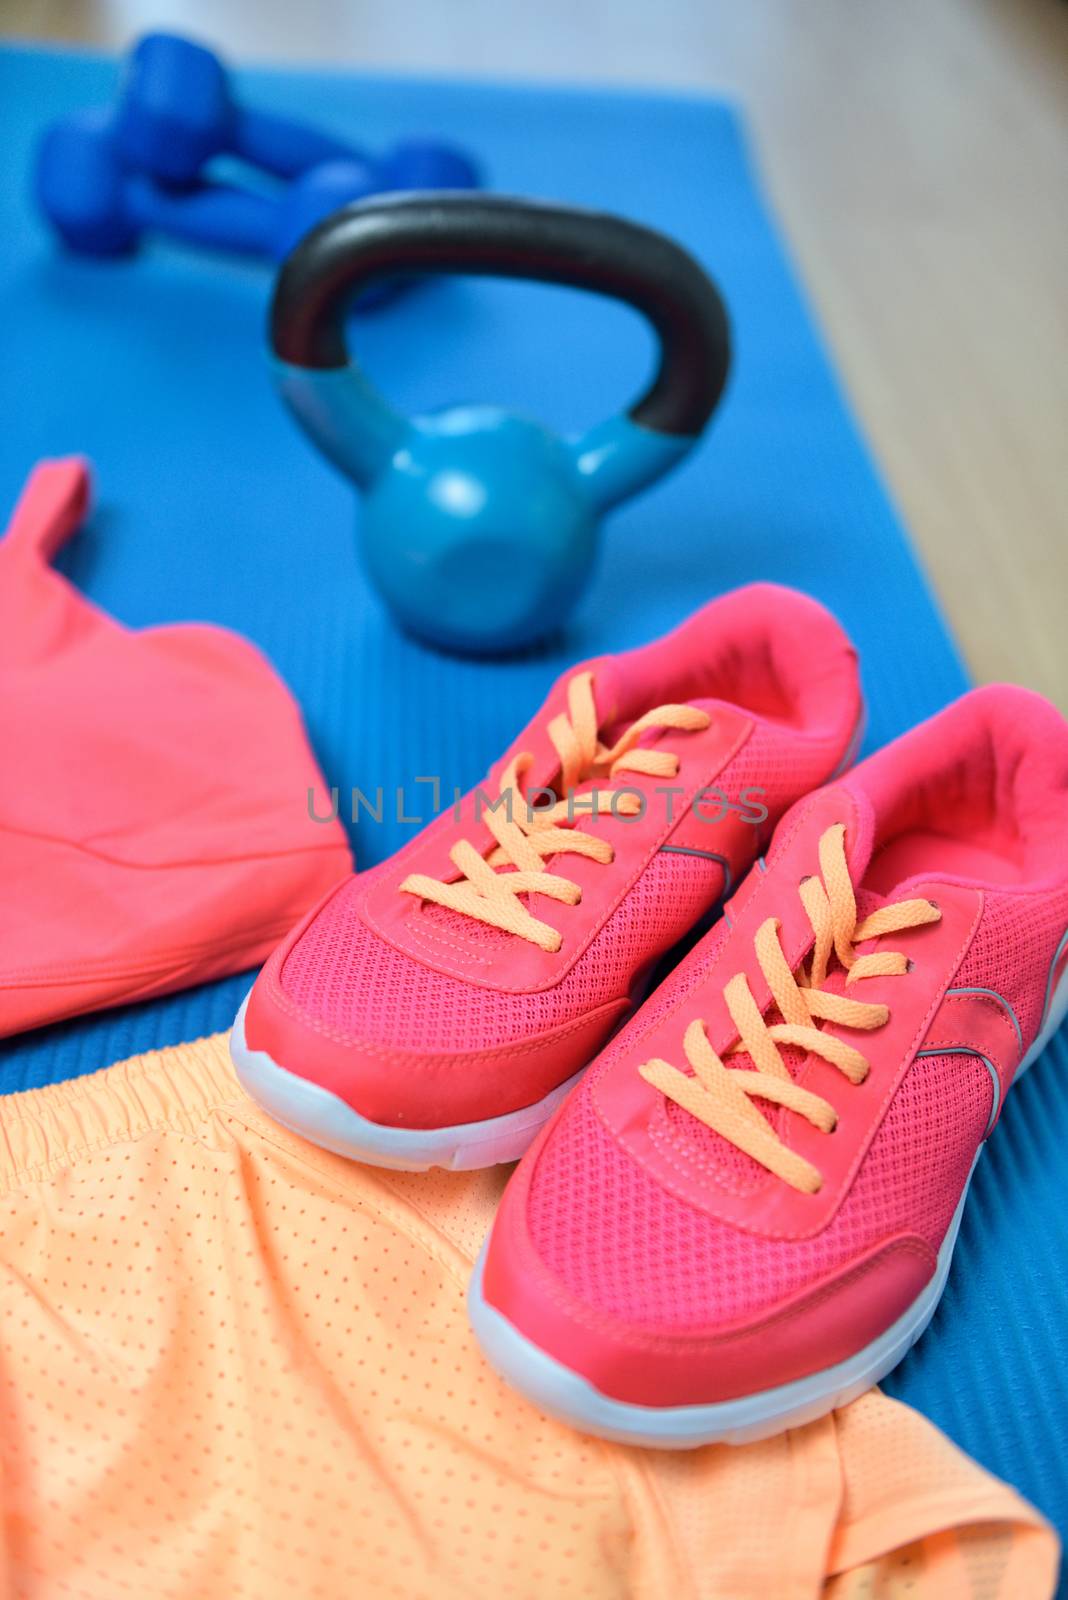 Gym shoes - Fitness outfit closeup with kettlebell by Maridav